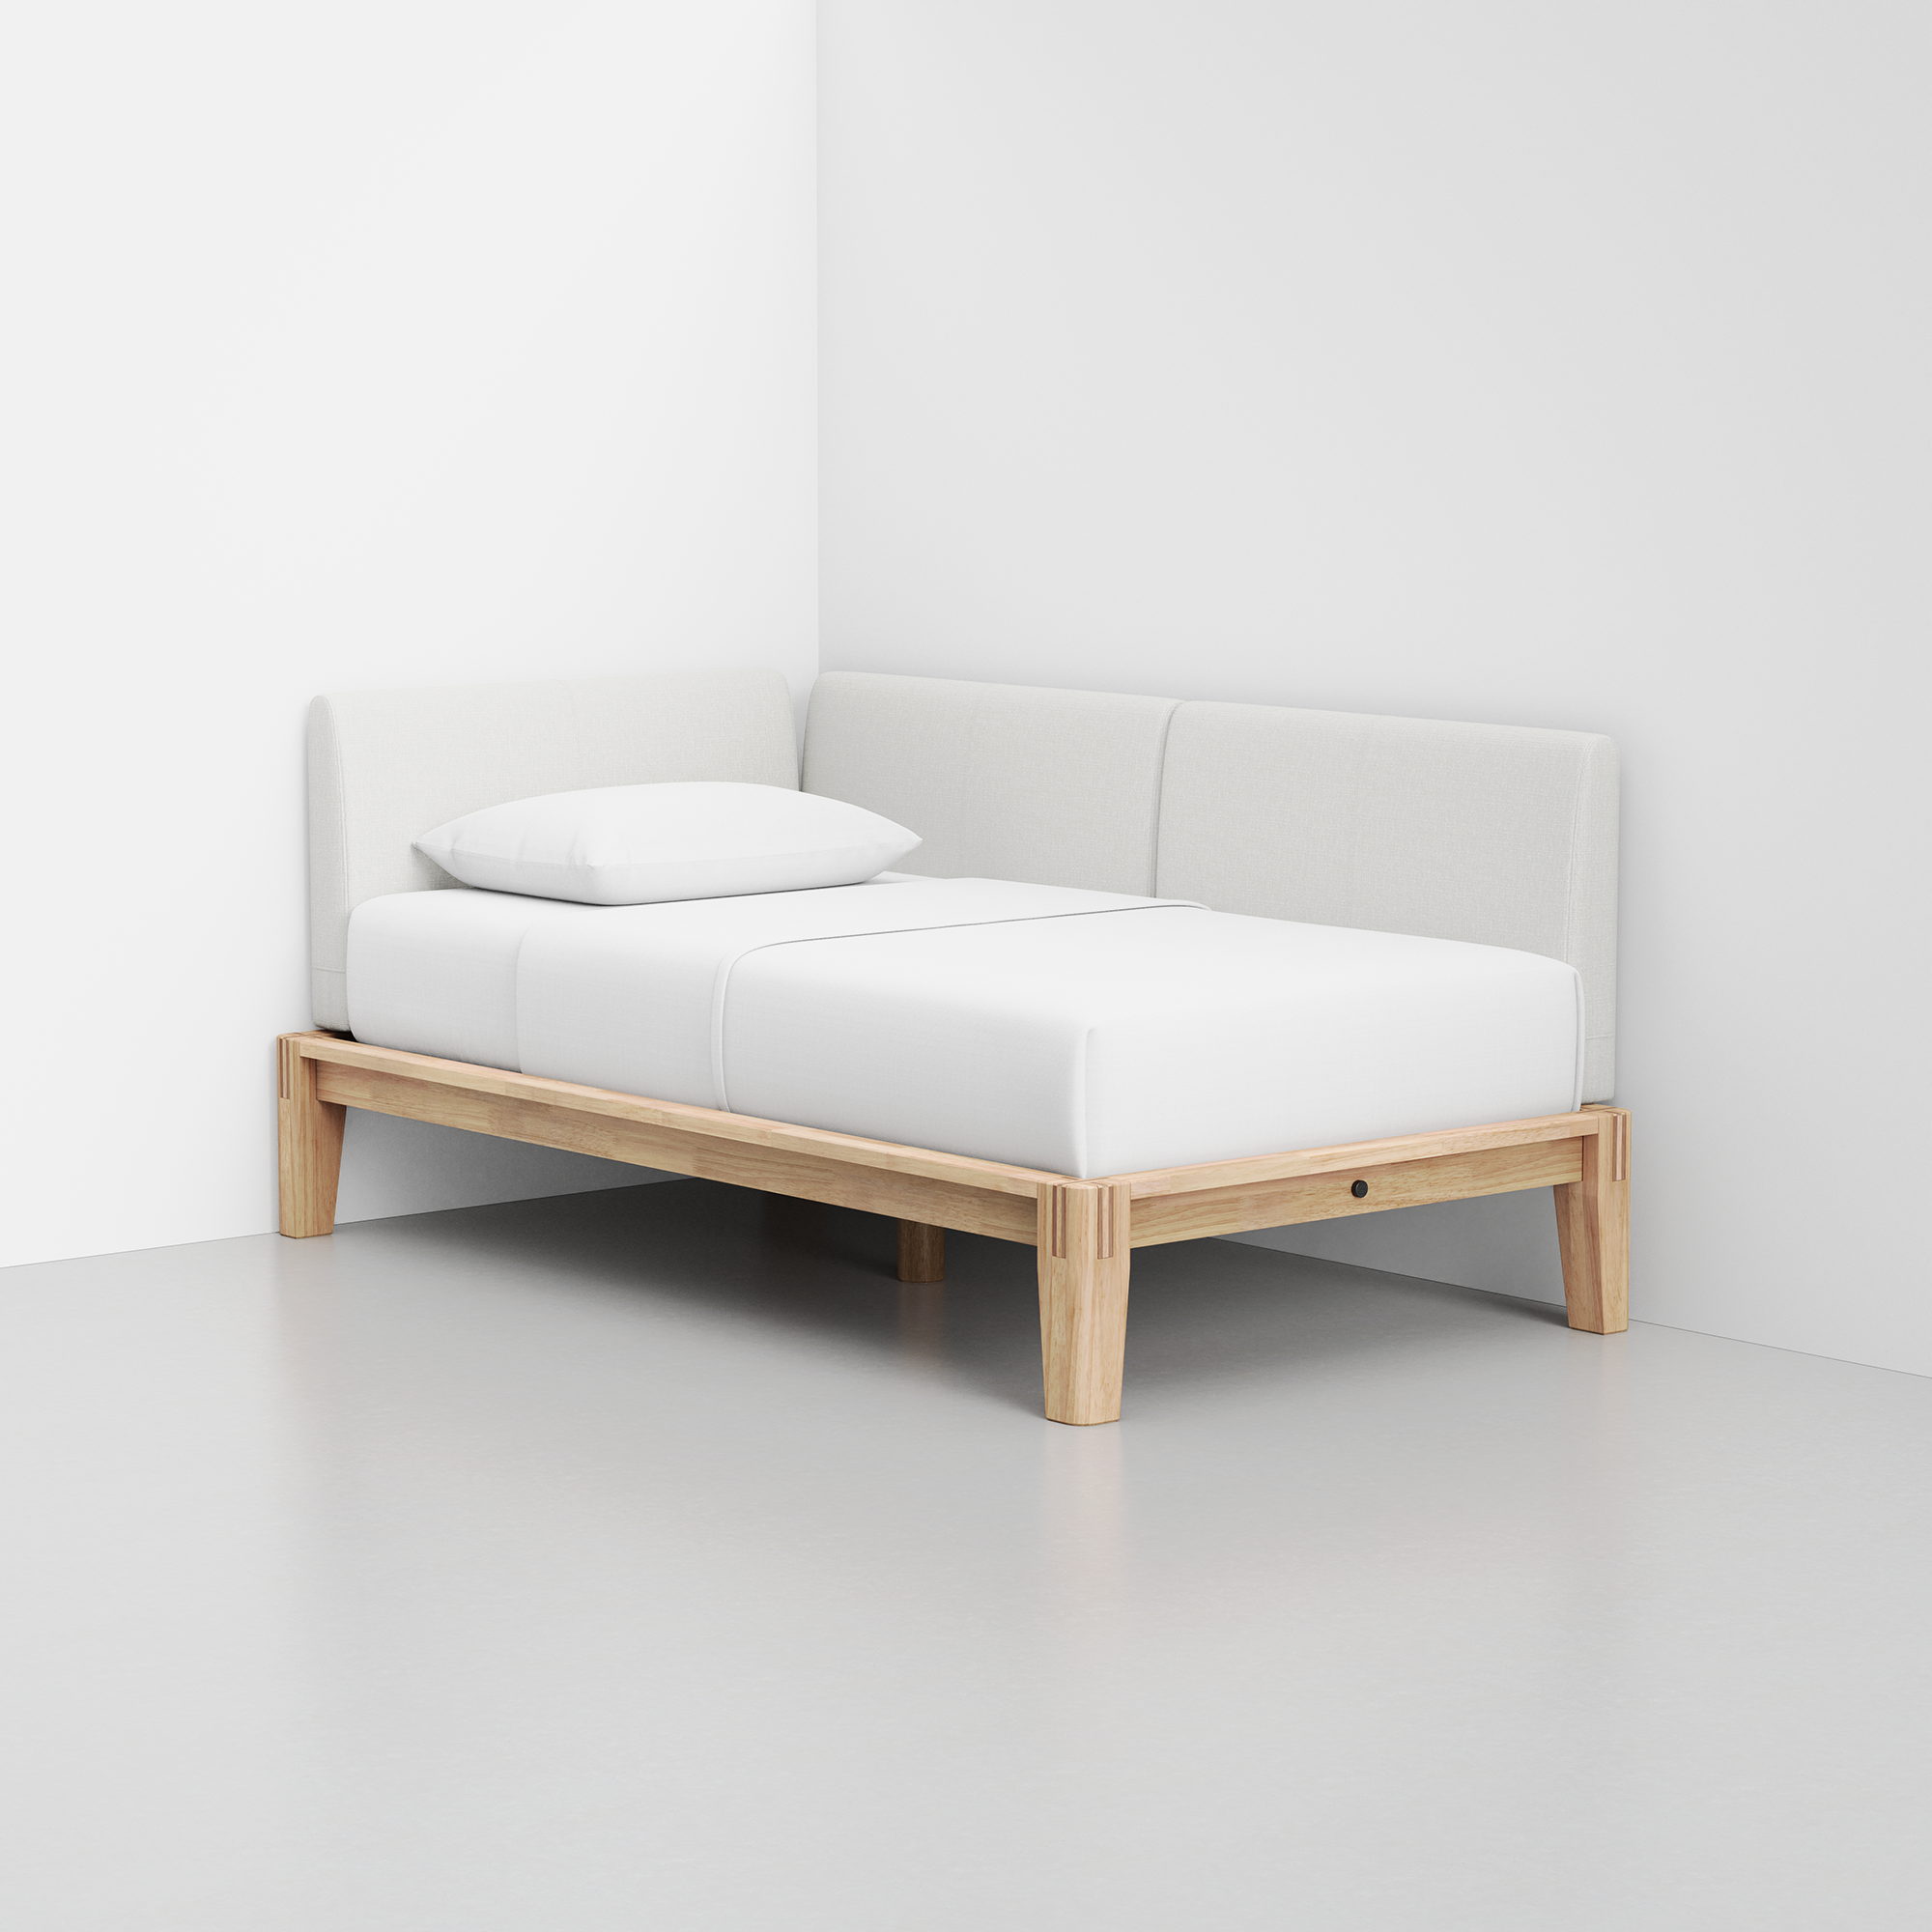 PDP Image: The Daybed (Natural / Light Linen) - Rendering - Front